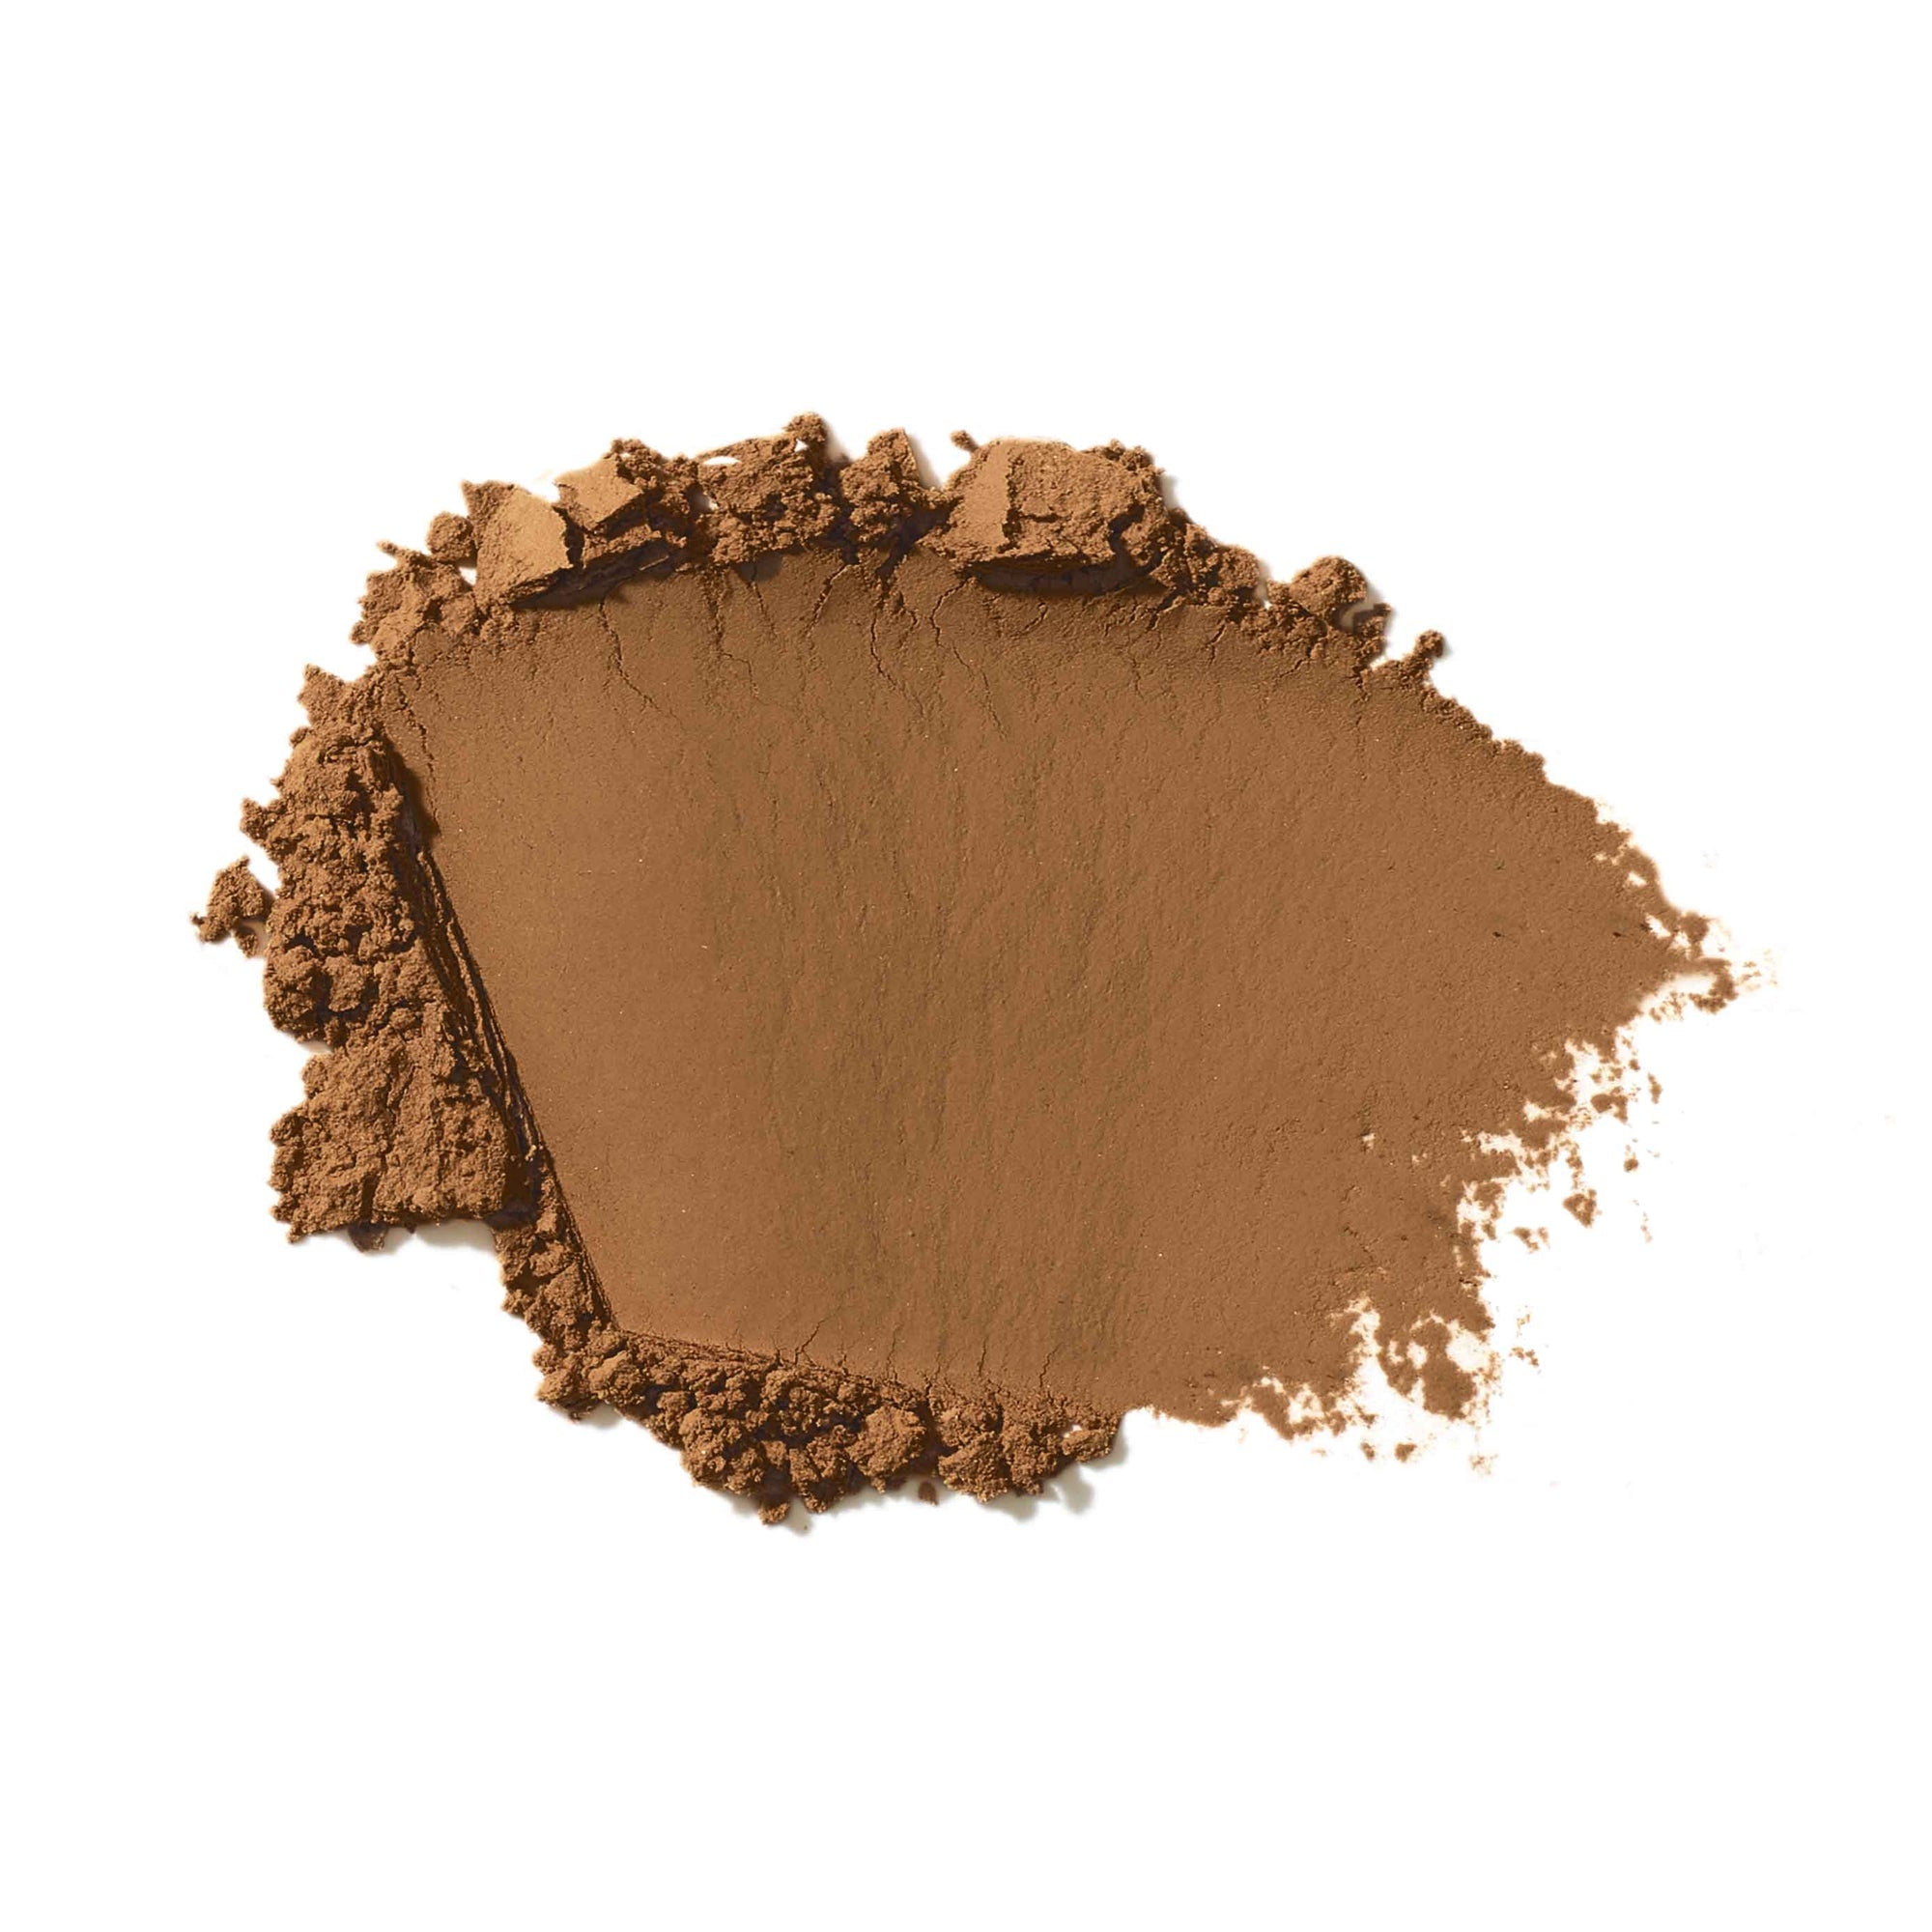 Jane Iredale® PurePressed® Base Mineral Foundation REFILL SPF 20/15